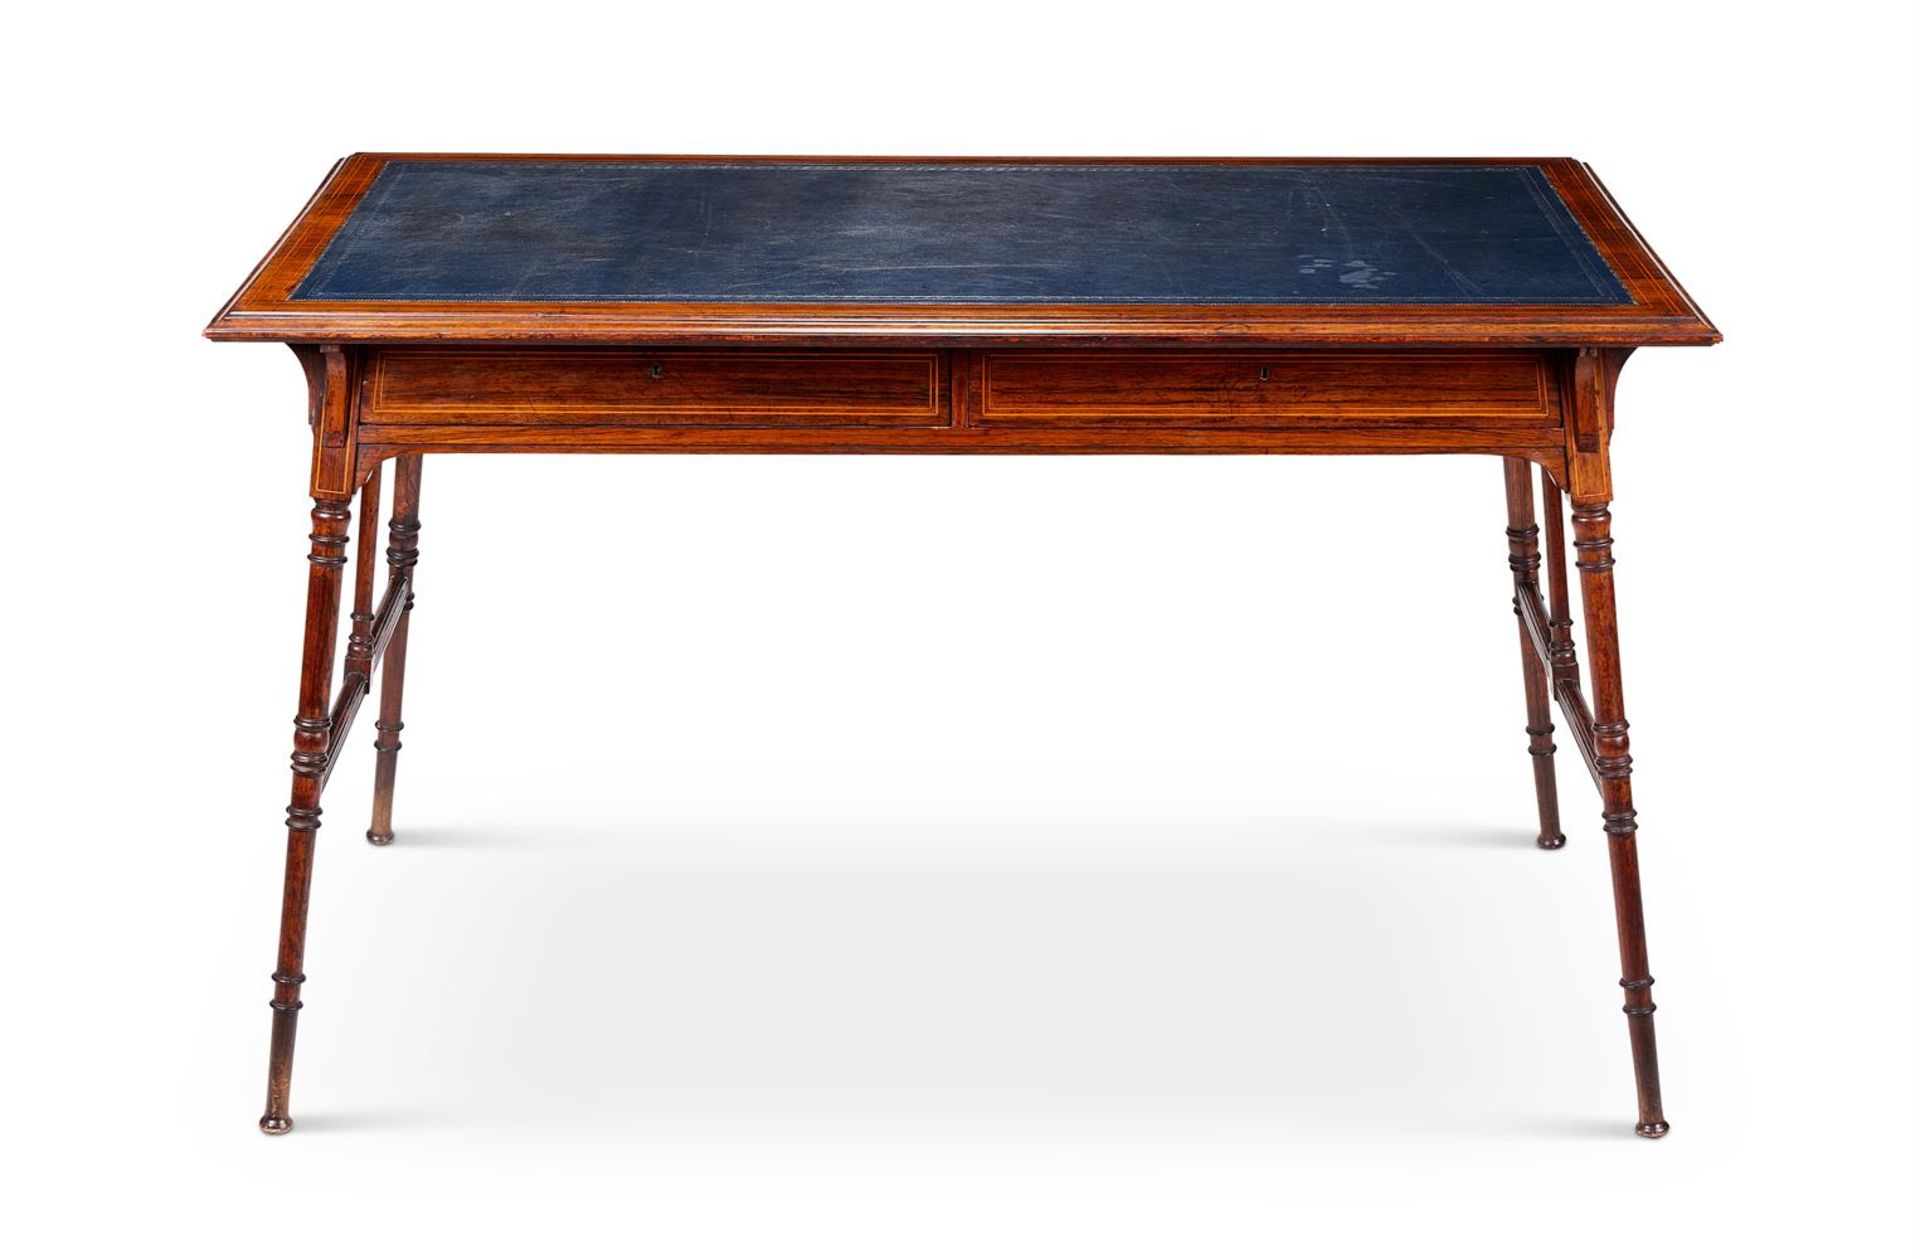 Y A LATE VICTORIAN ROSEWOOD WRITING TABLE, LATE 19TH CENTURY